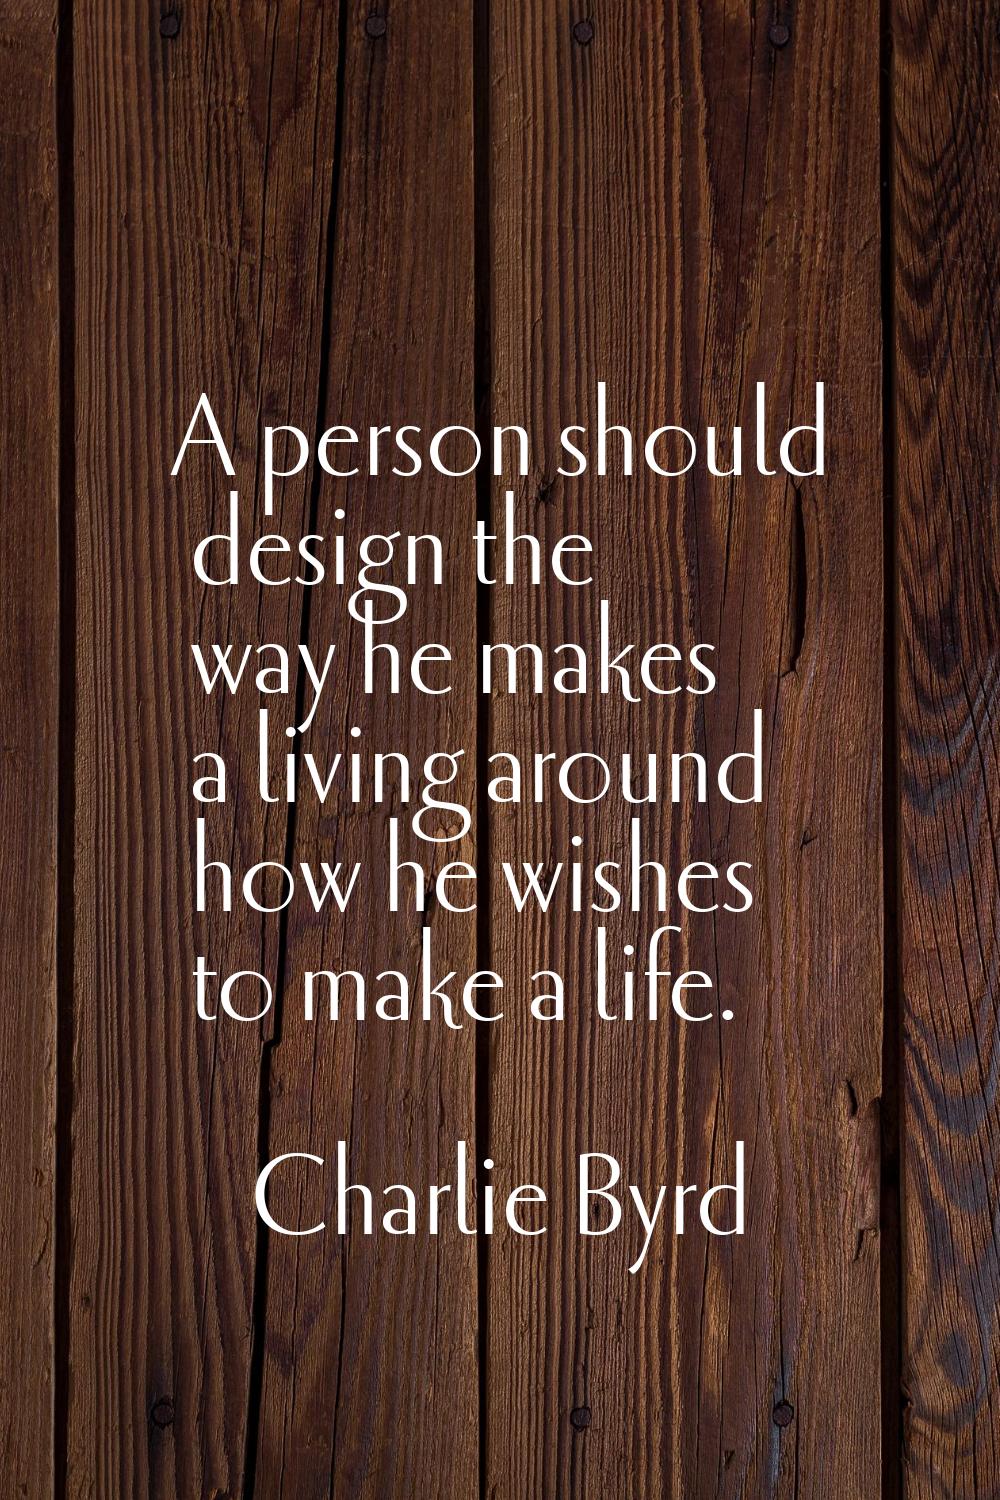 A person should design the way he makes a living around how he wishes to make a life.